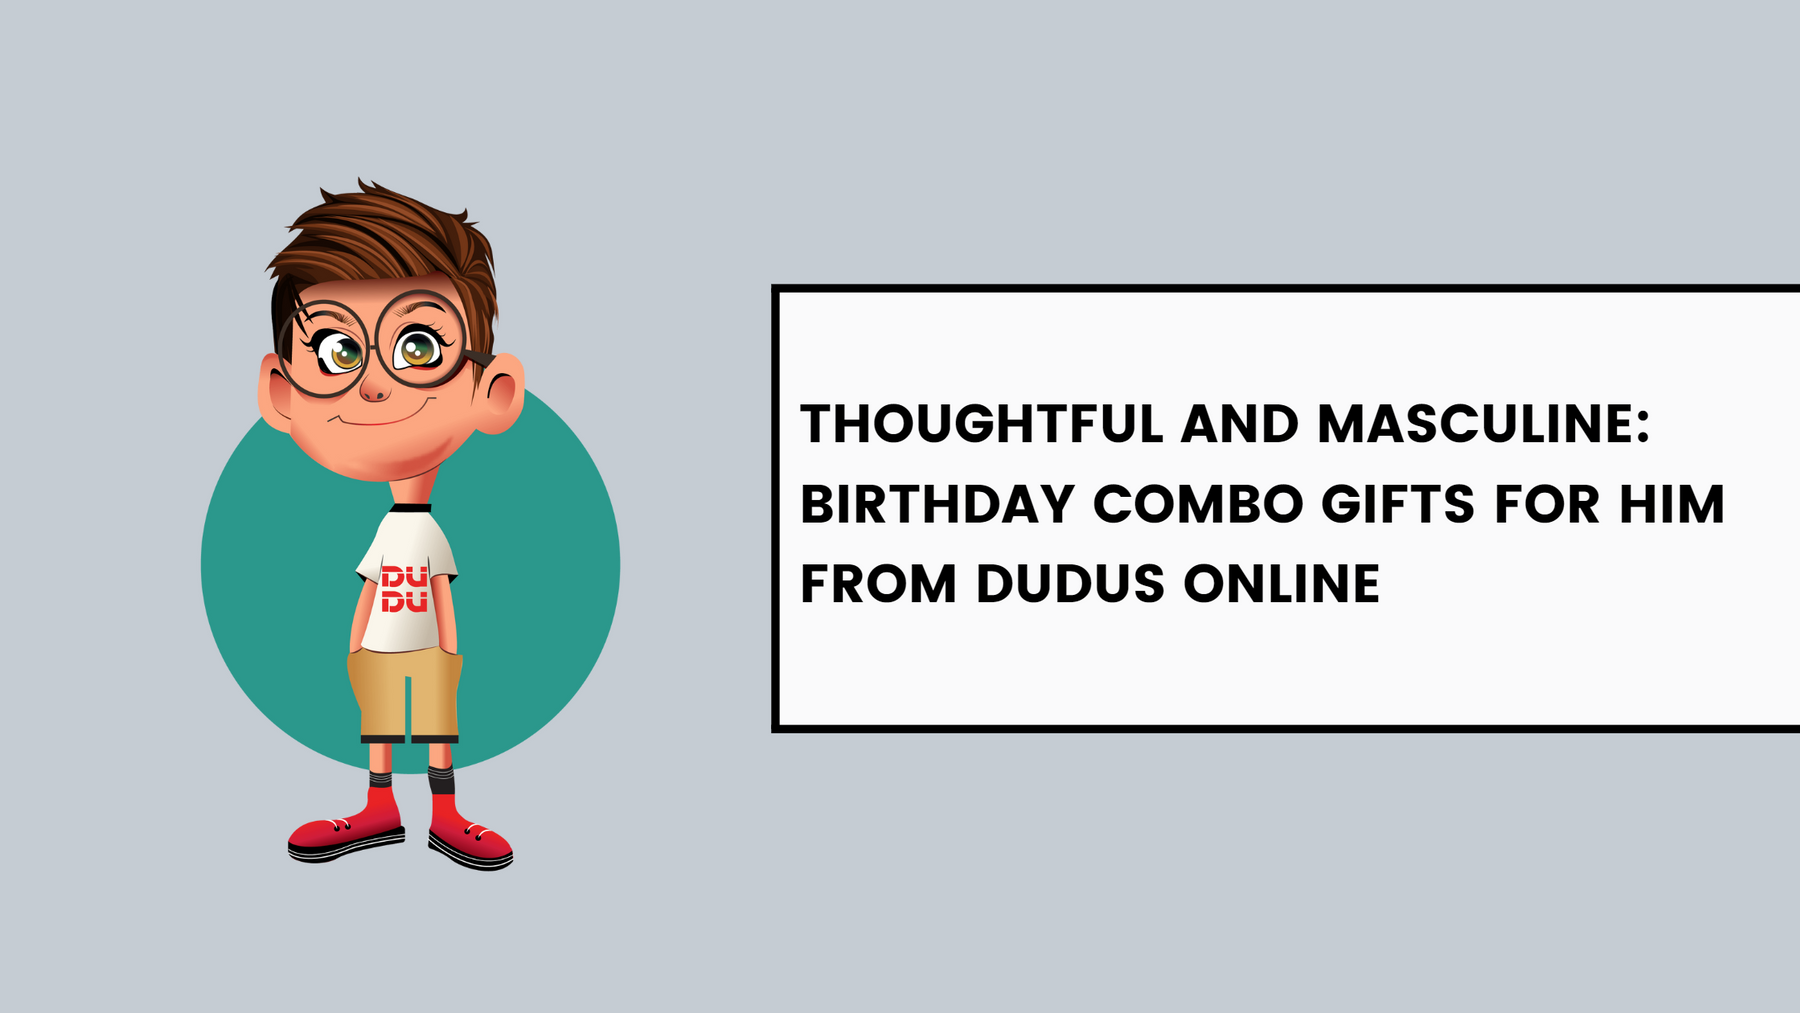 Thoughtful And Masculine: Birthday Combo Gifts For Him From Dudus Online